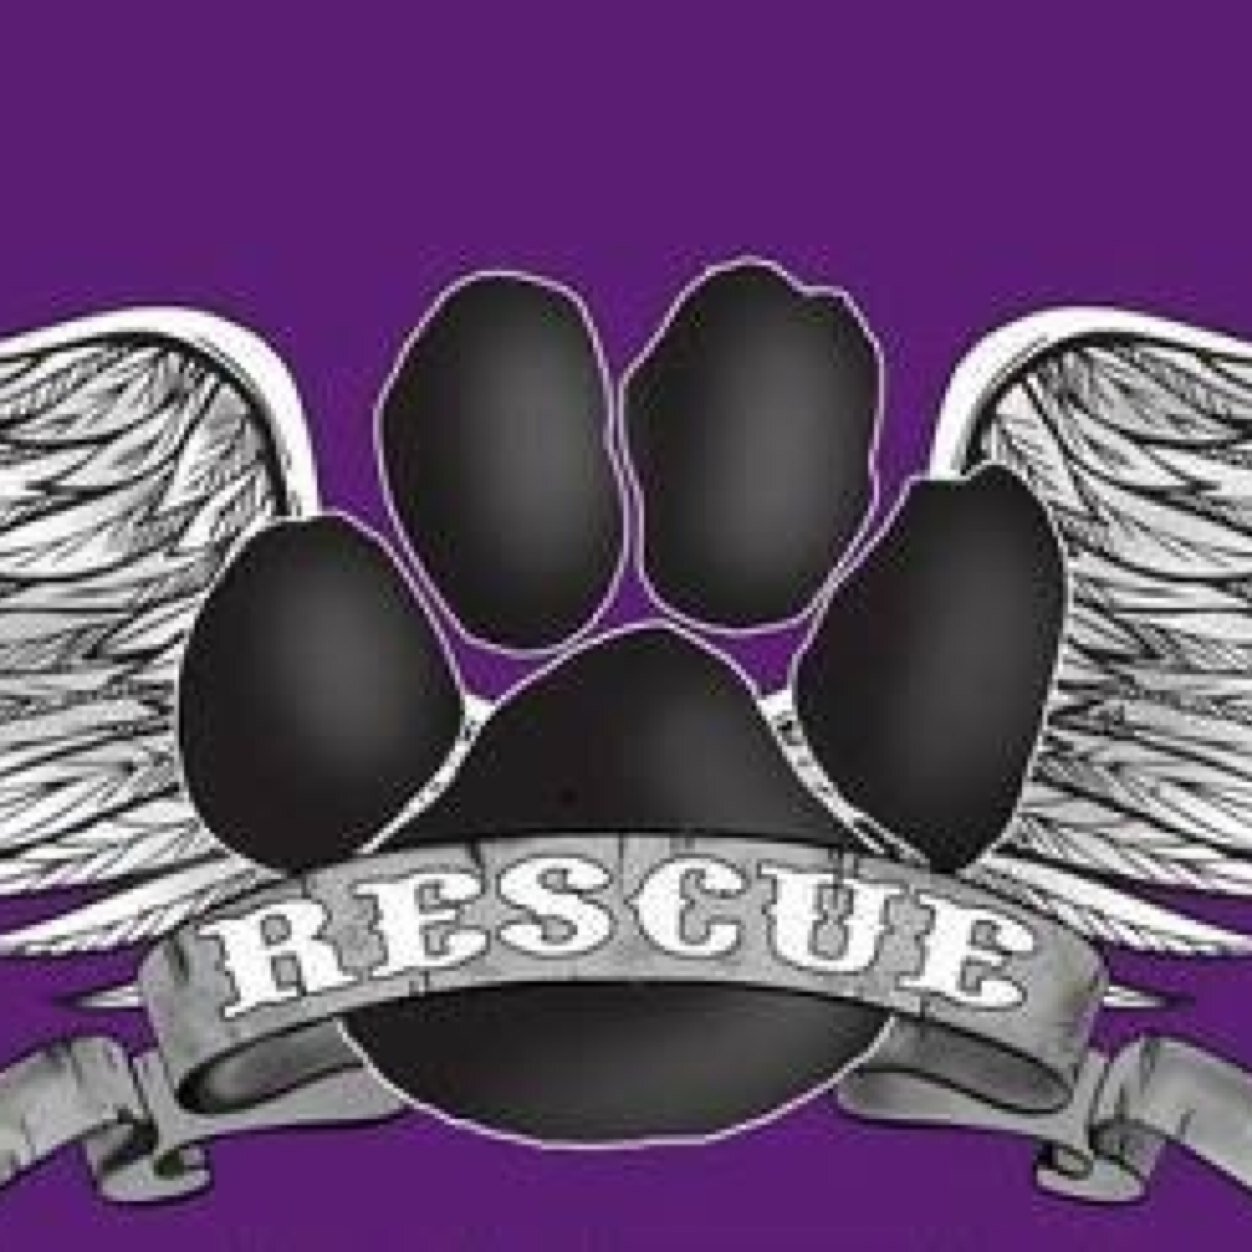 We are a 501(c)3 non profit organization that saves animals from local high kill shelters. We often take the hardest cases first; sick/injured/seniors.